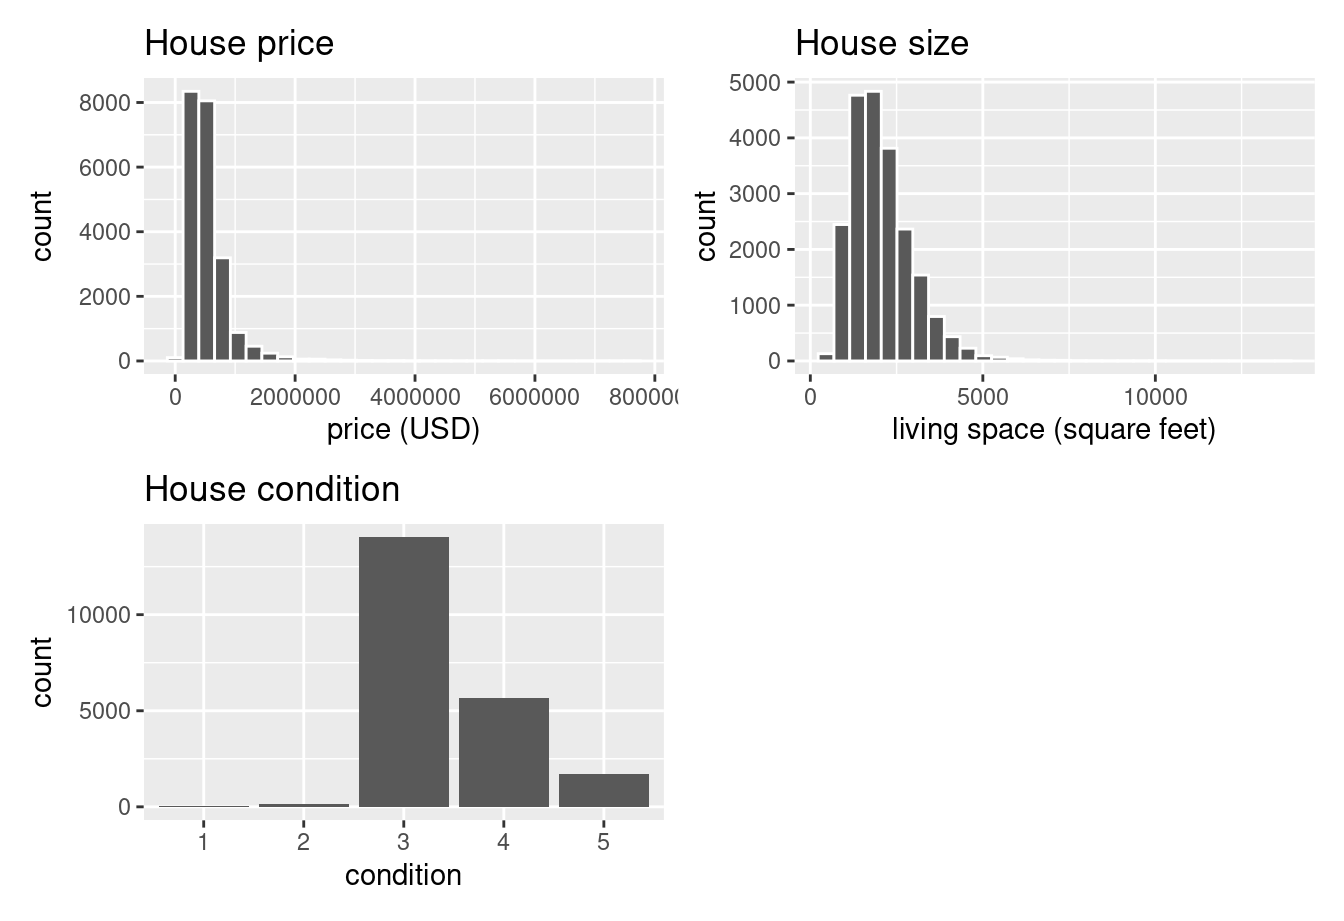 Exploratory visualizations of Seattle house prices data.